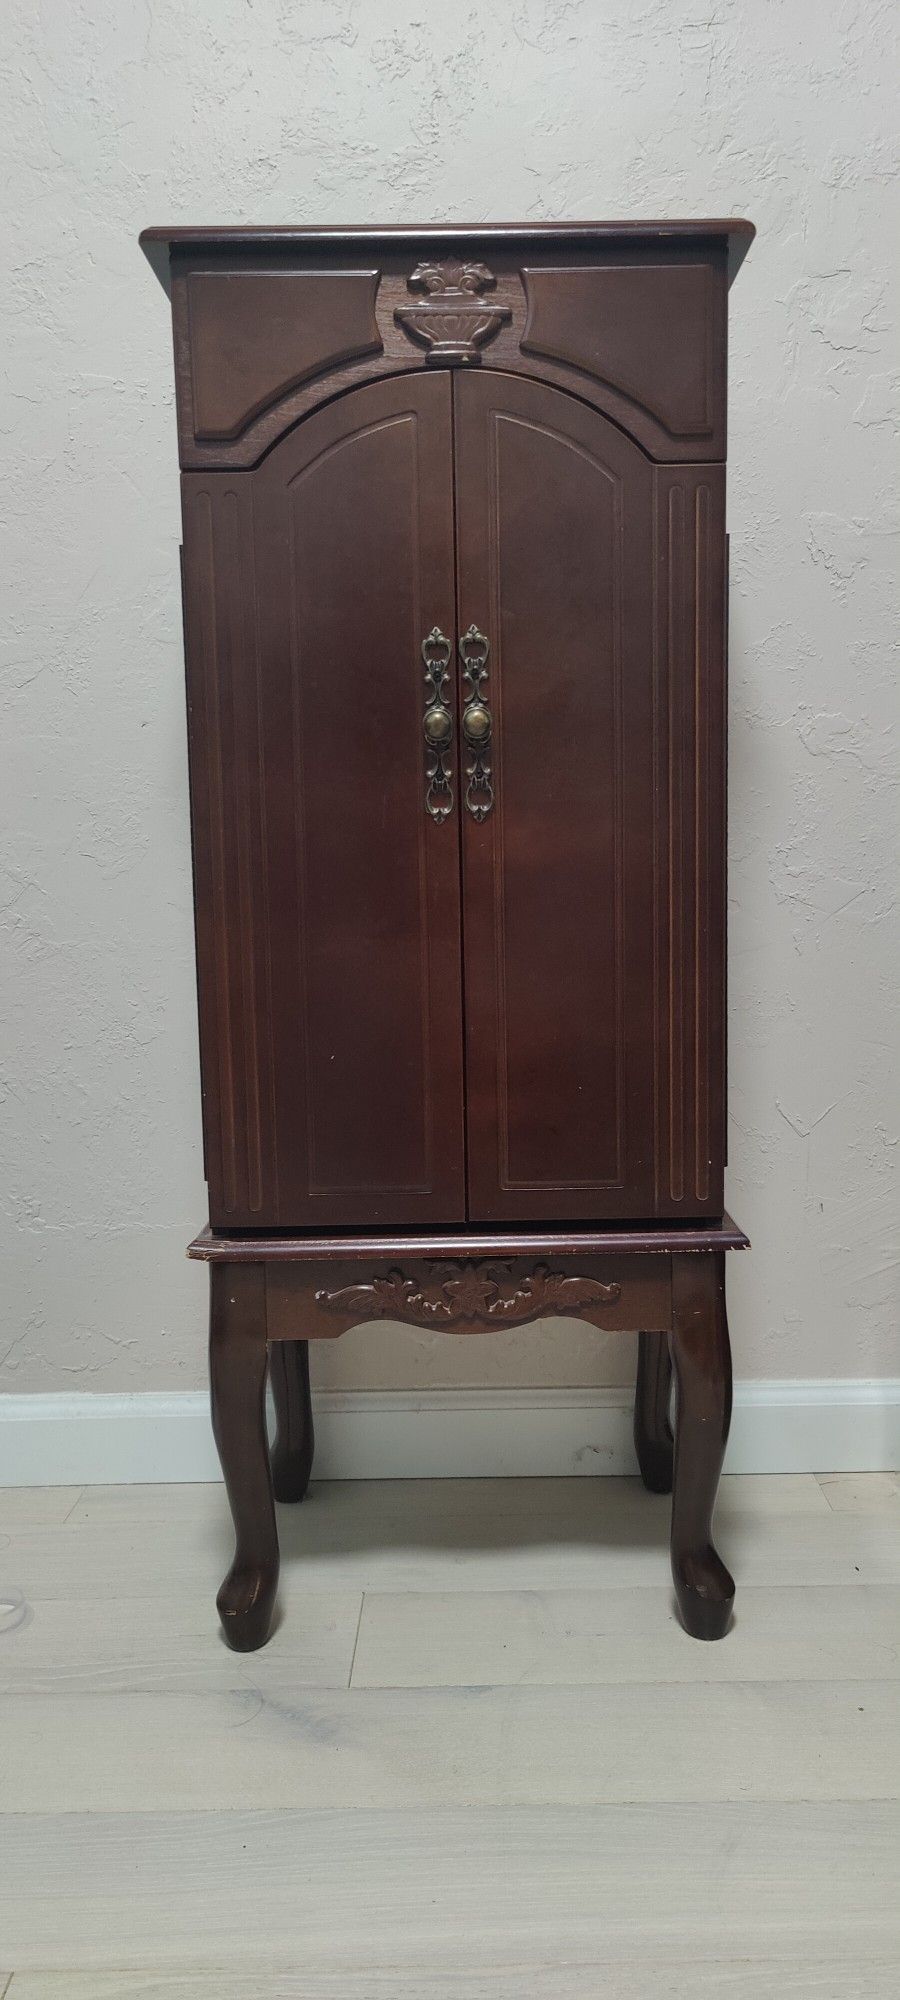 Jewelry Cabinet / Organizer Collectible